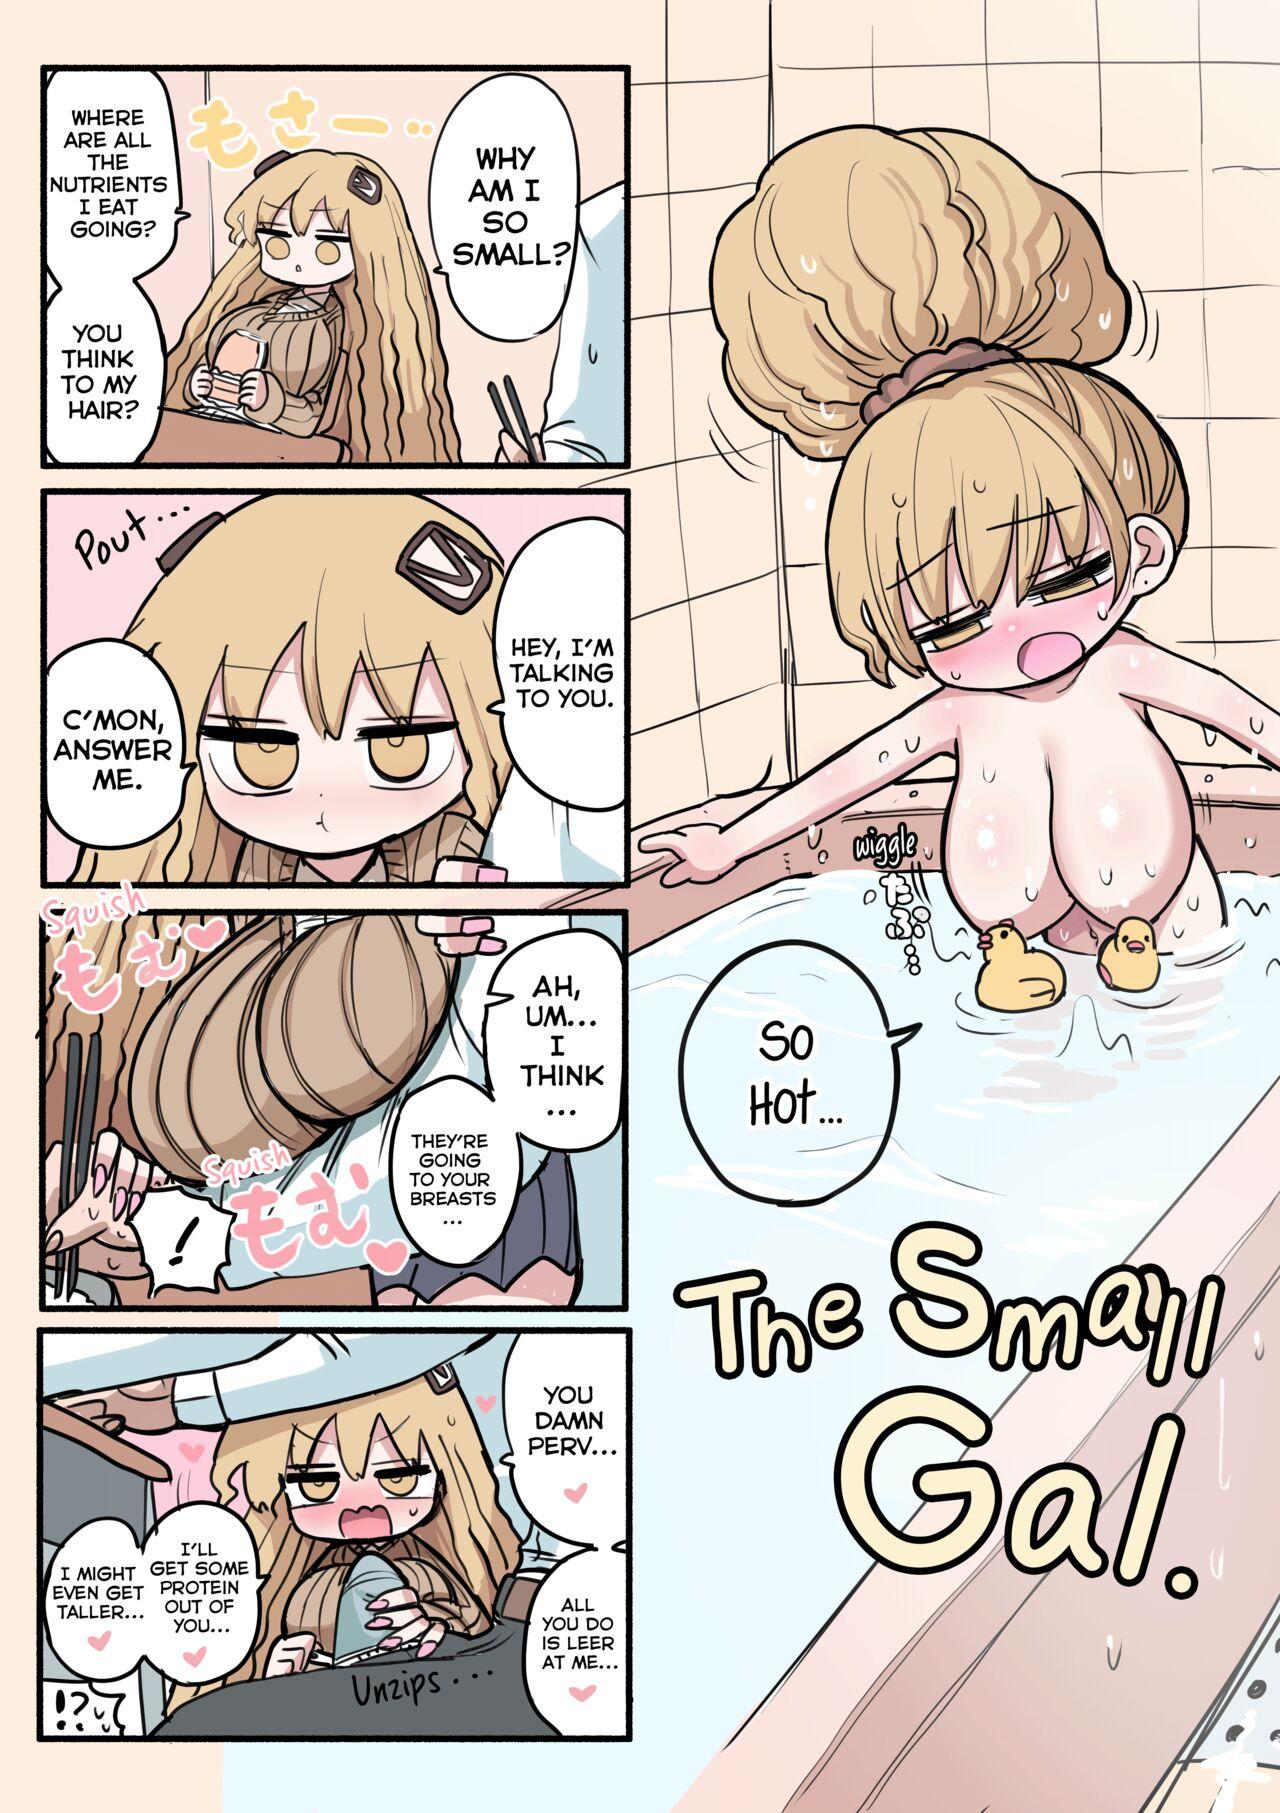 Chiisai Gal | The Small Gal 19